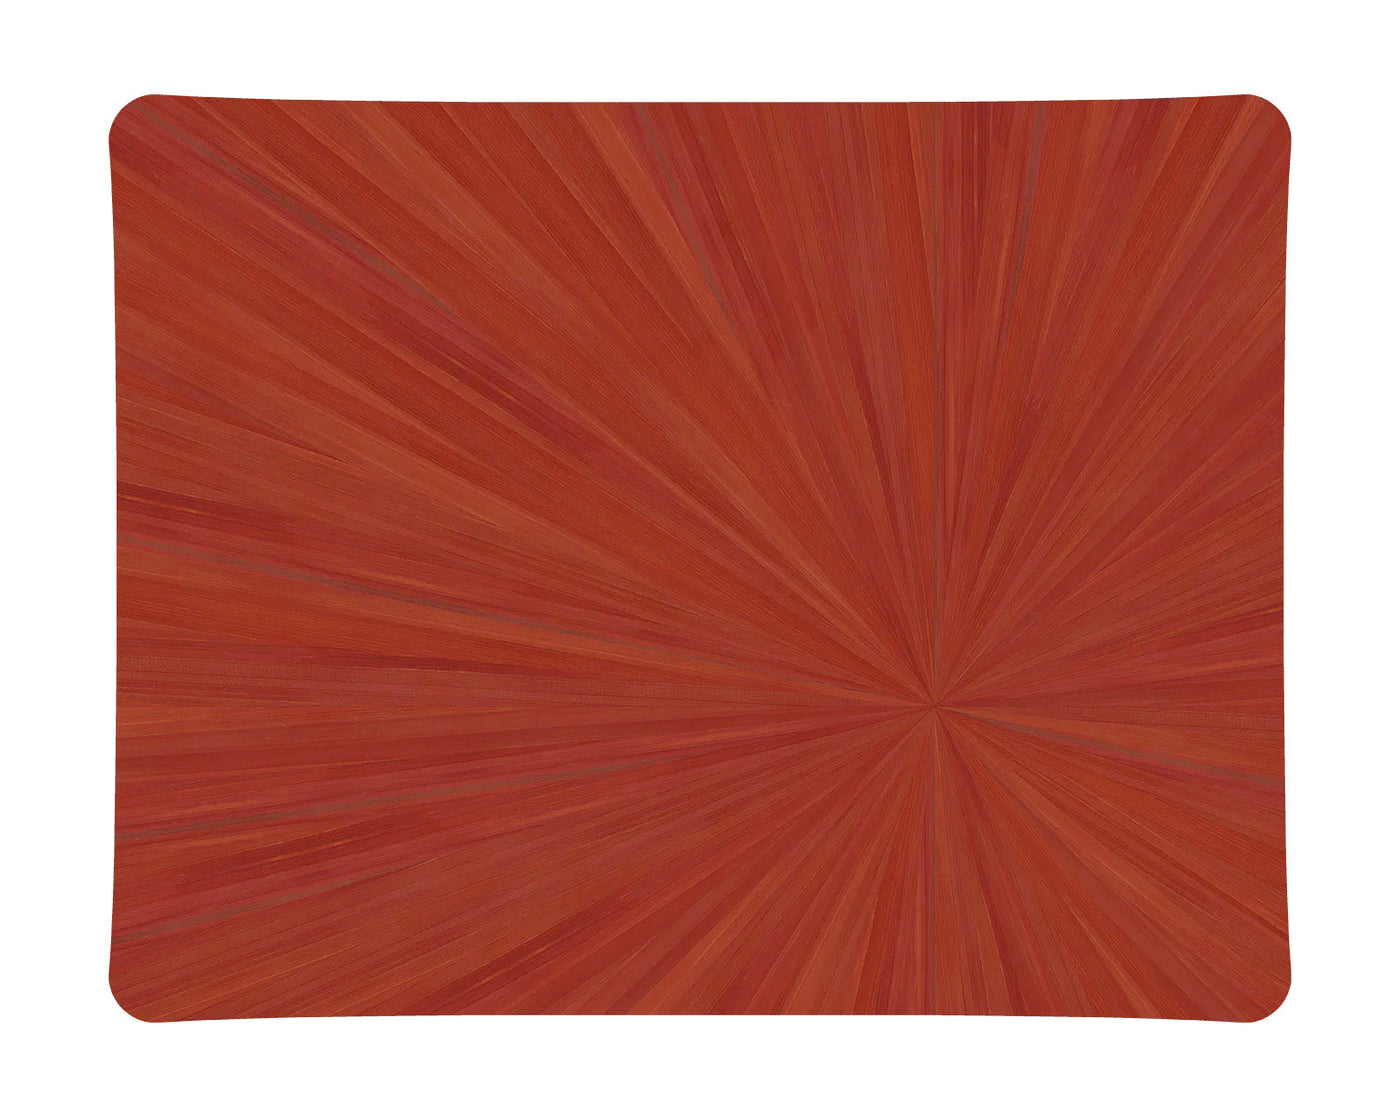 Tribeca - Large Acrylic Tray in Ruby